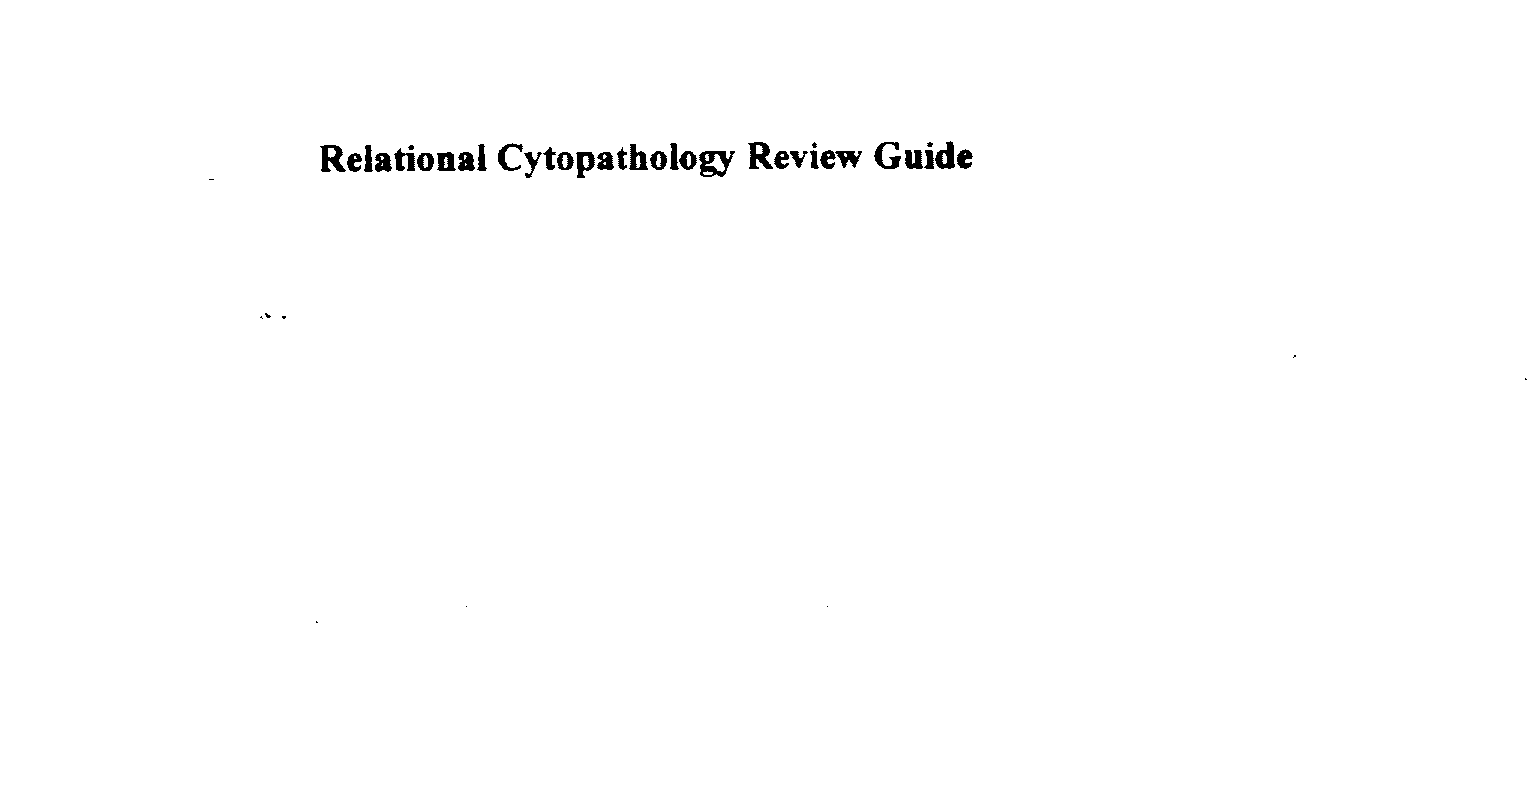  RELATIONAL CYTOPATHOLOGY REVIEW GUIDE